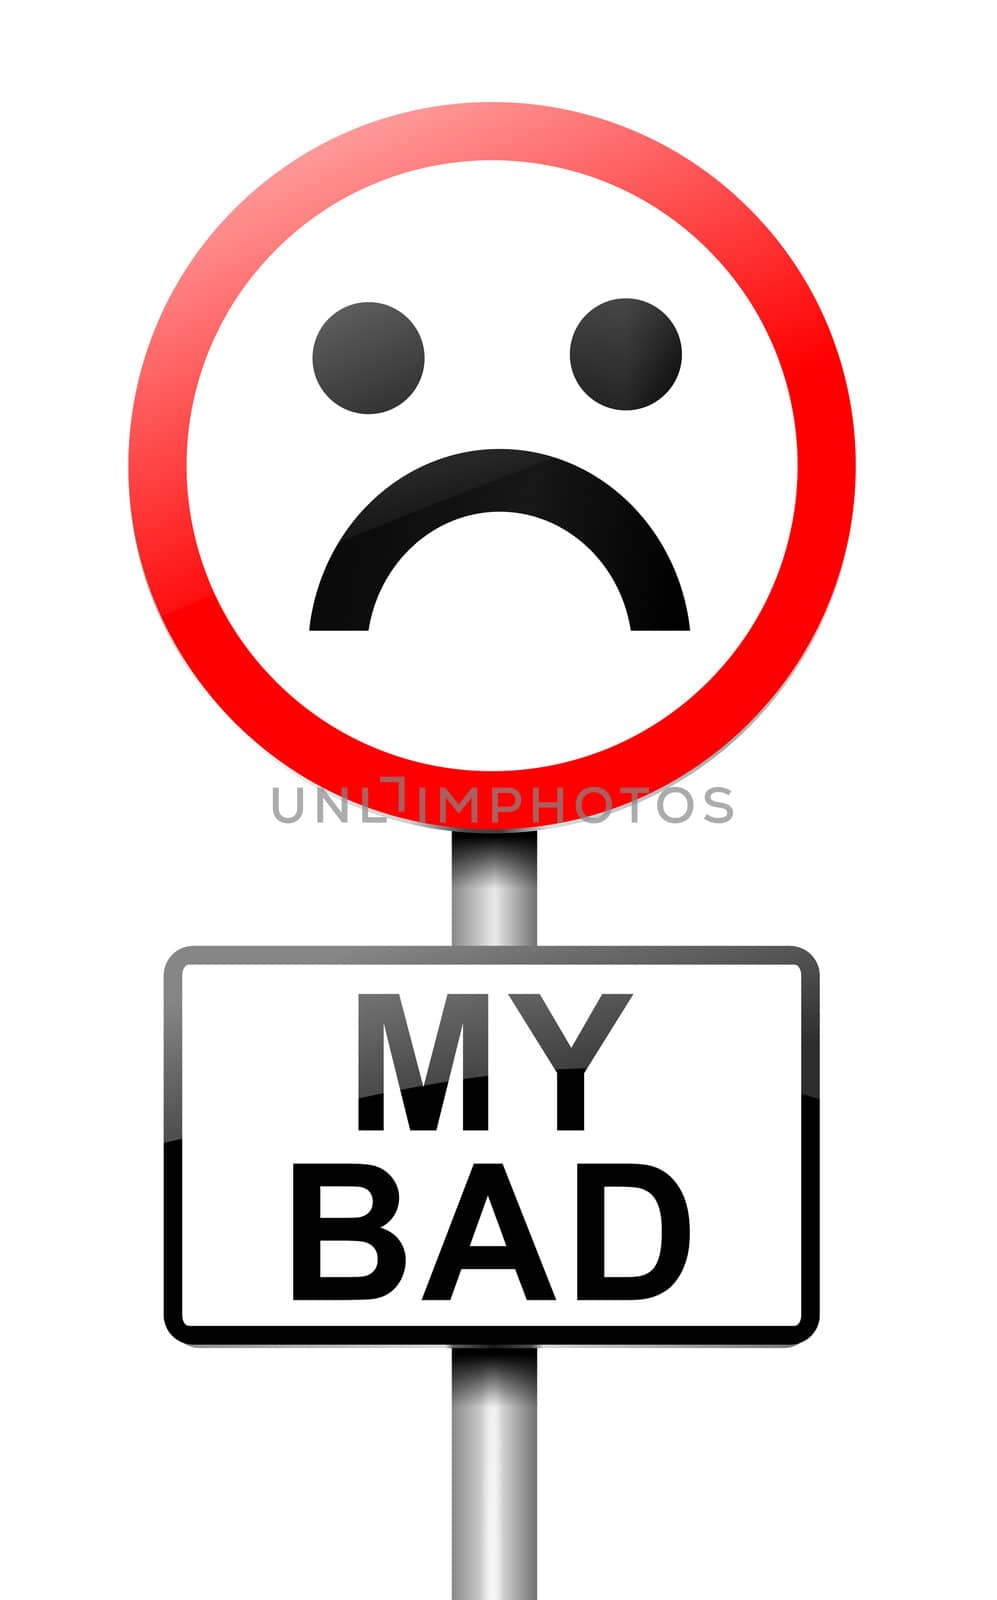 Illustration depicting a roadsign with a 'my bad' concept. White background.